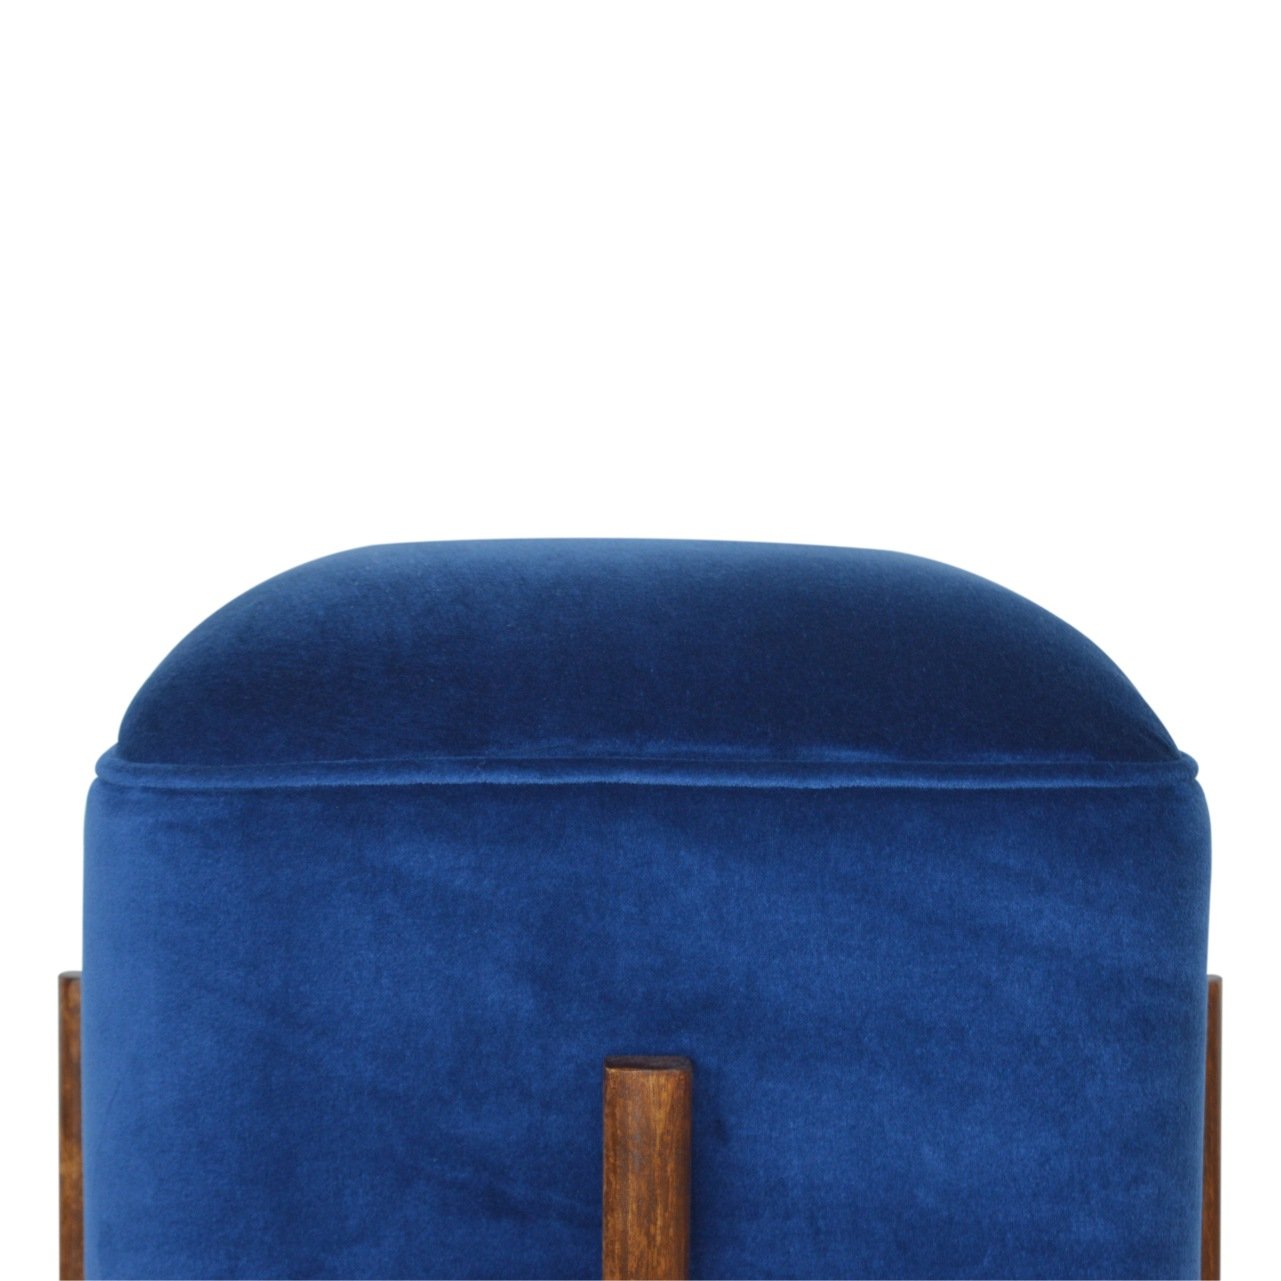 Royal Blue Velvet Footstool with Solid Wood Legs